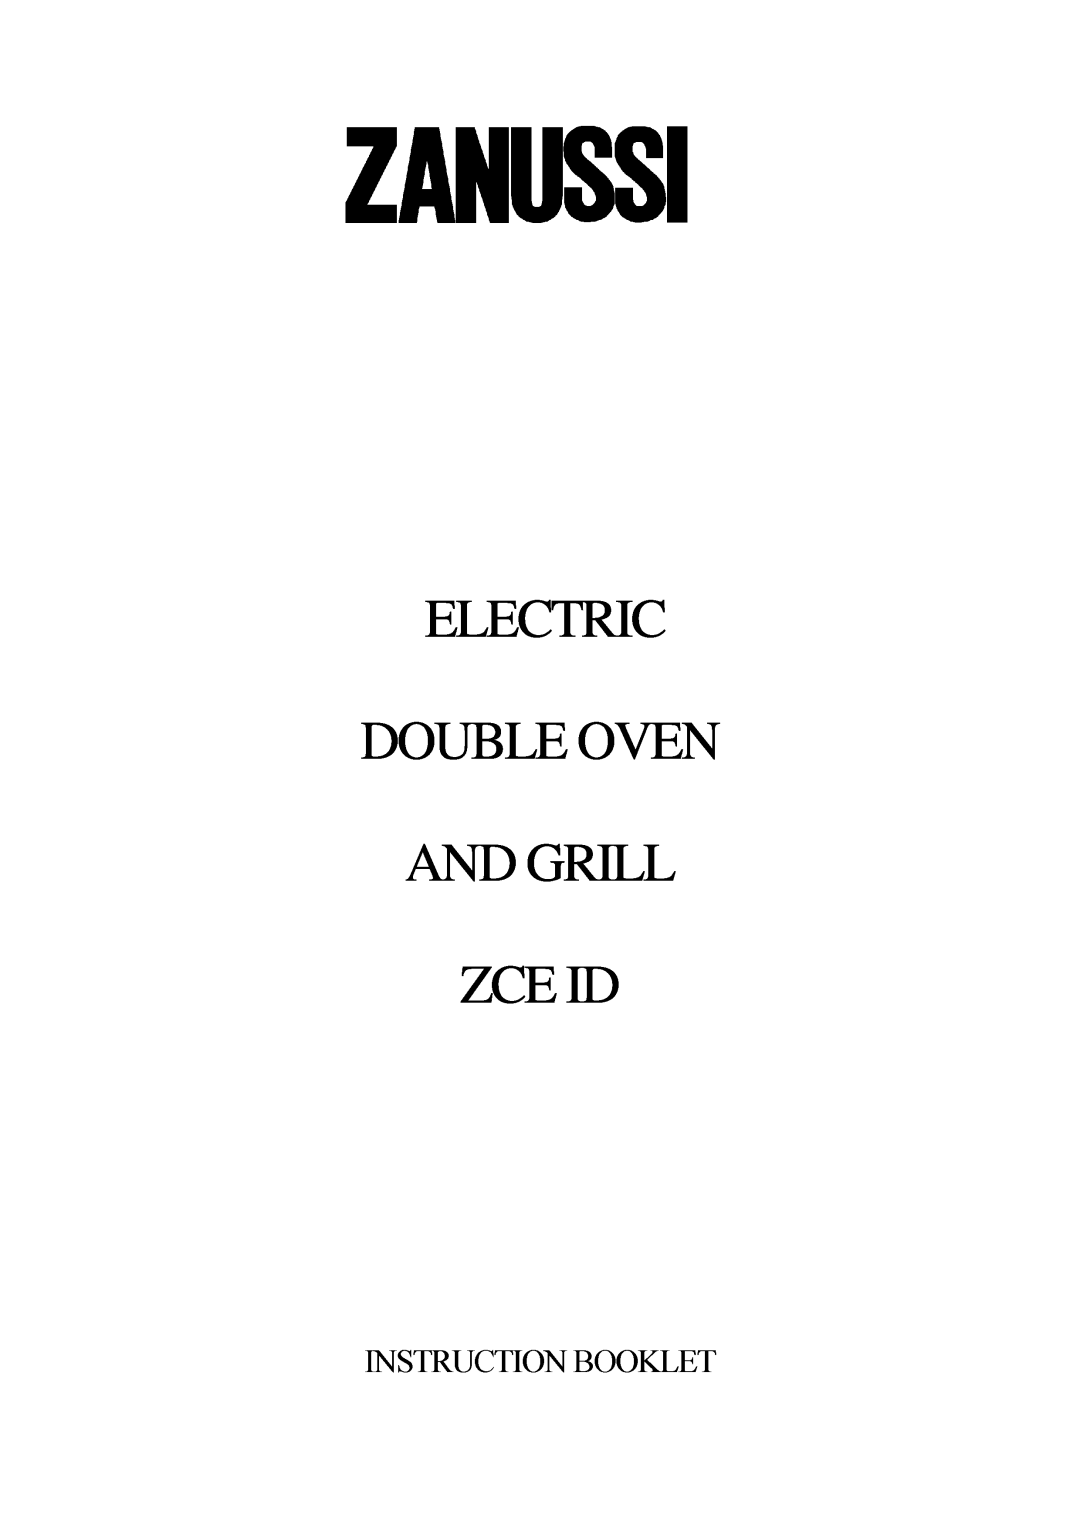 Zanussi ZCE ID manual Instructionzce Idbooklet, Electric Double Oven And Grill 